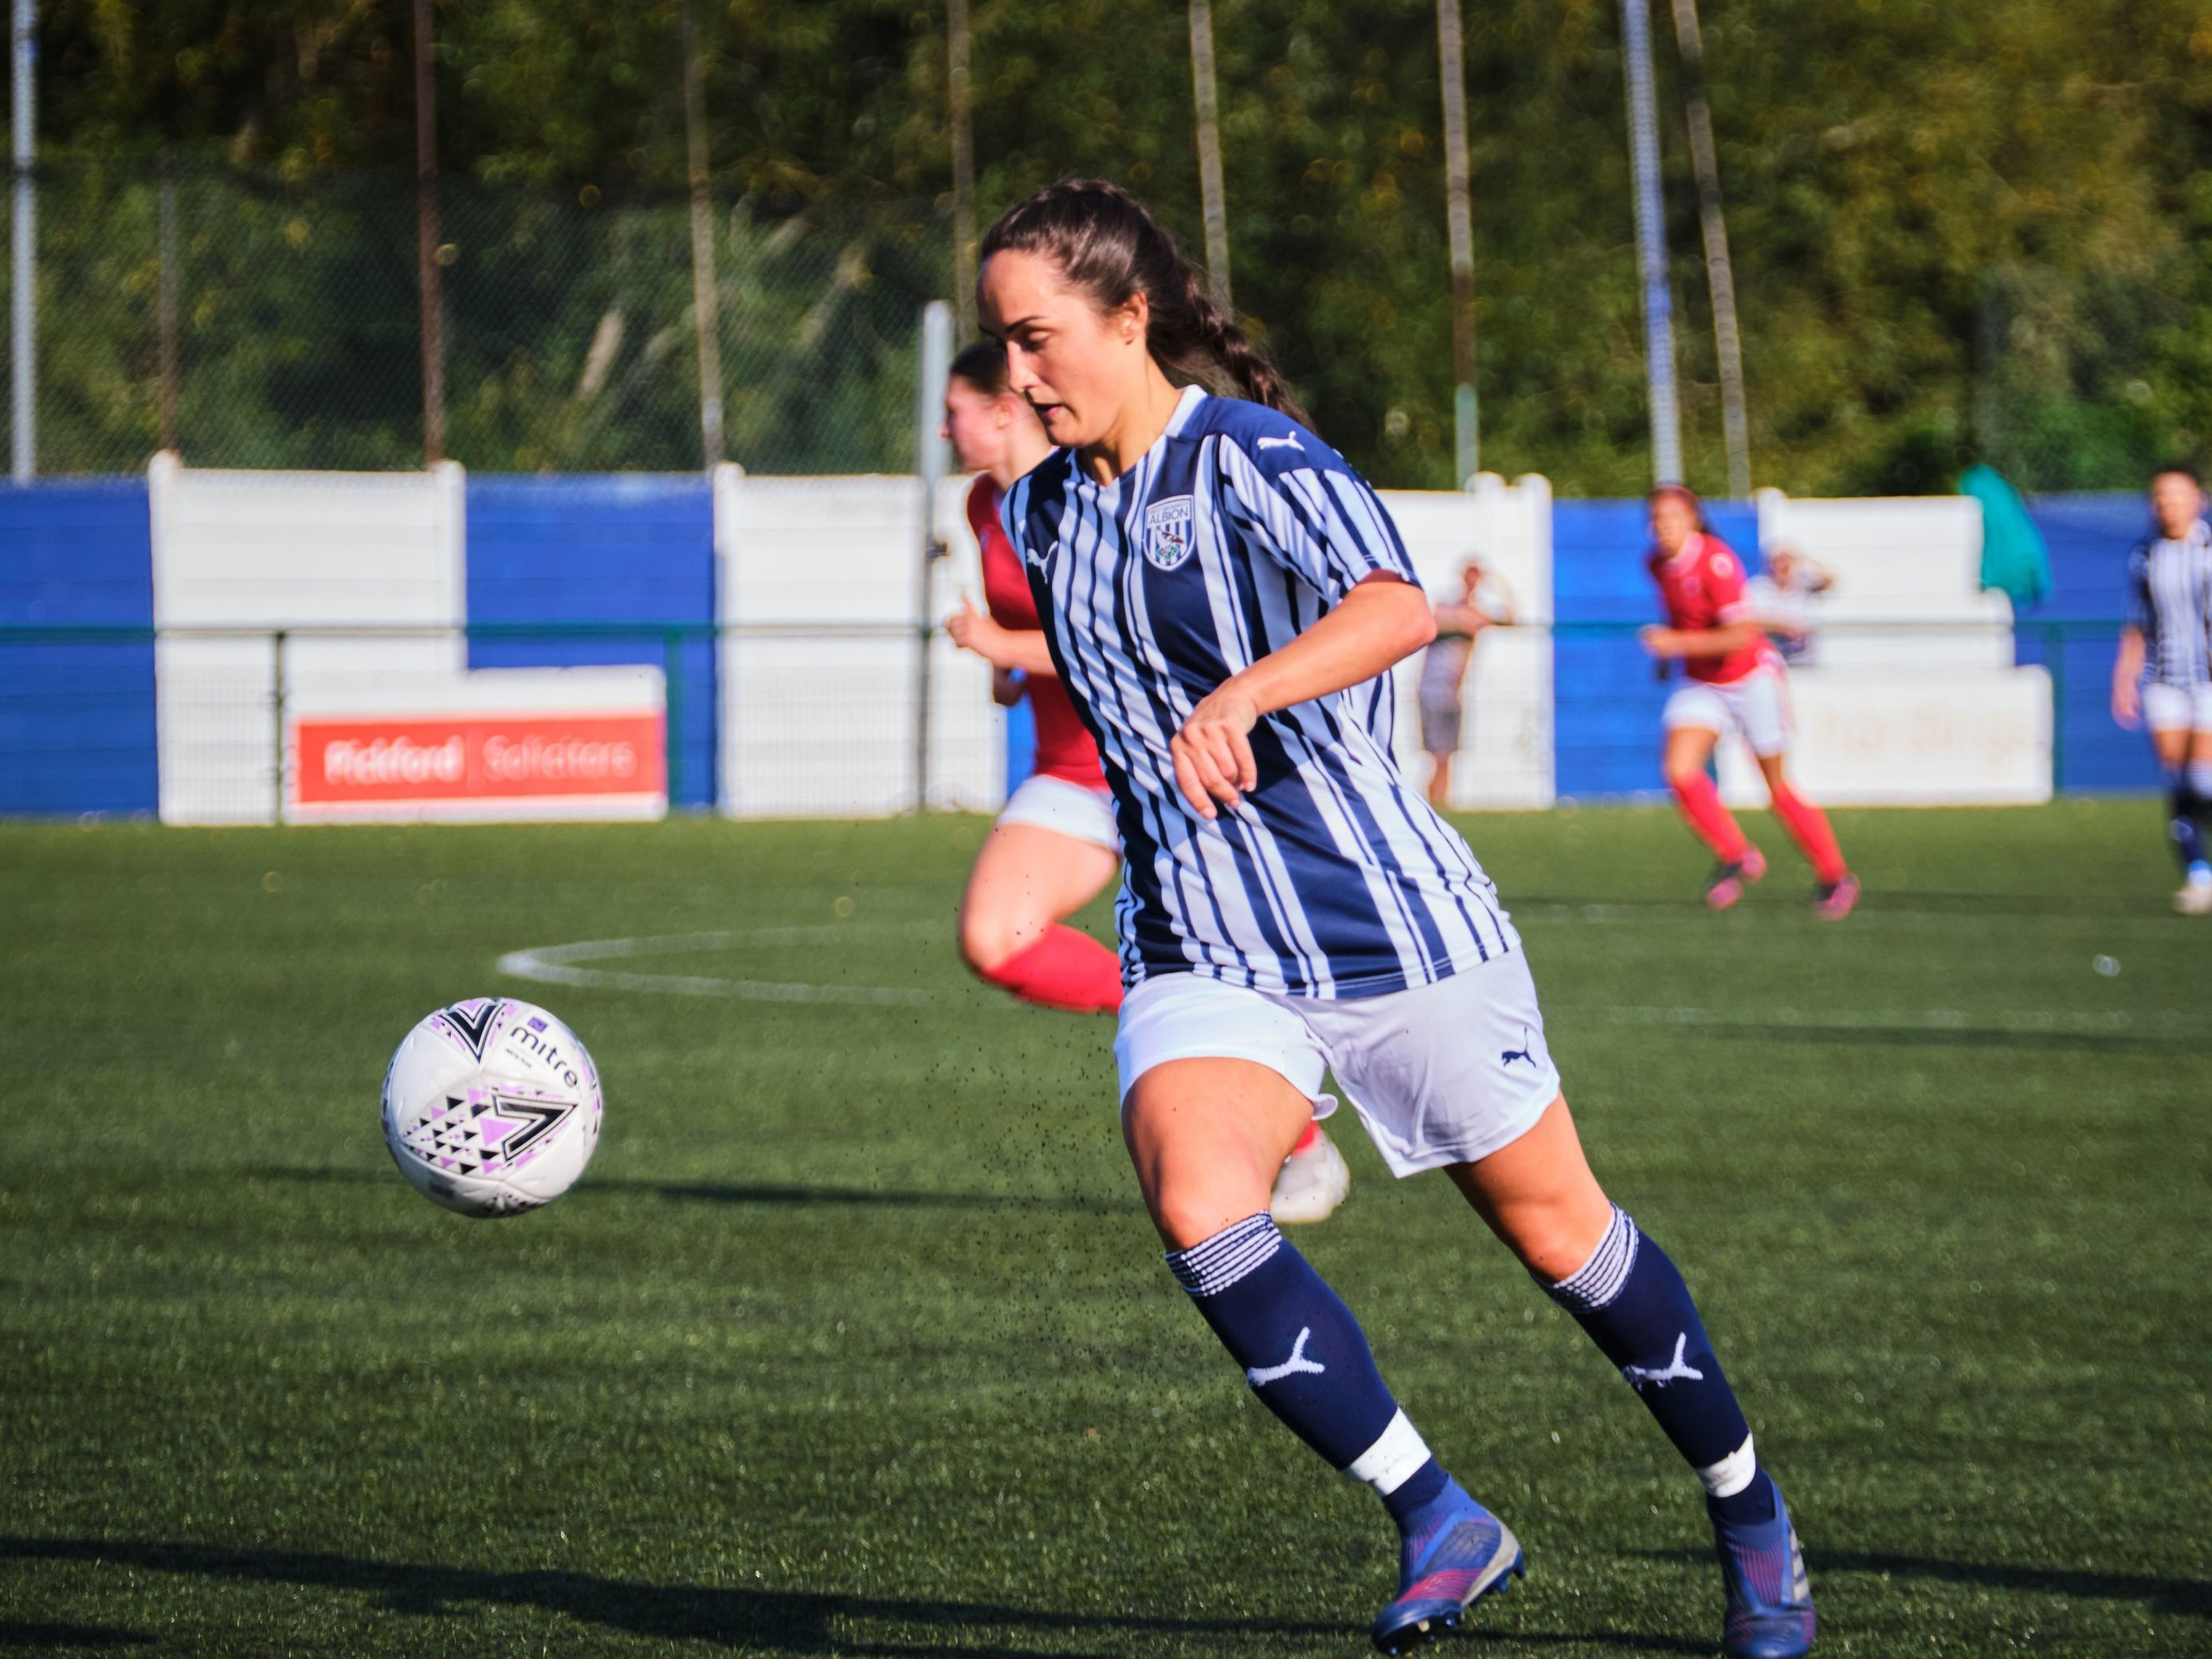 Albion Women are delighted to confirm Jade Arber’s return to the football club.